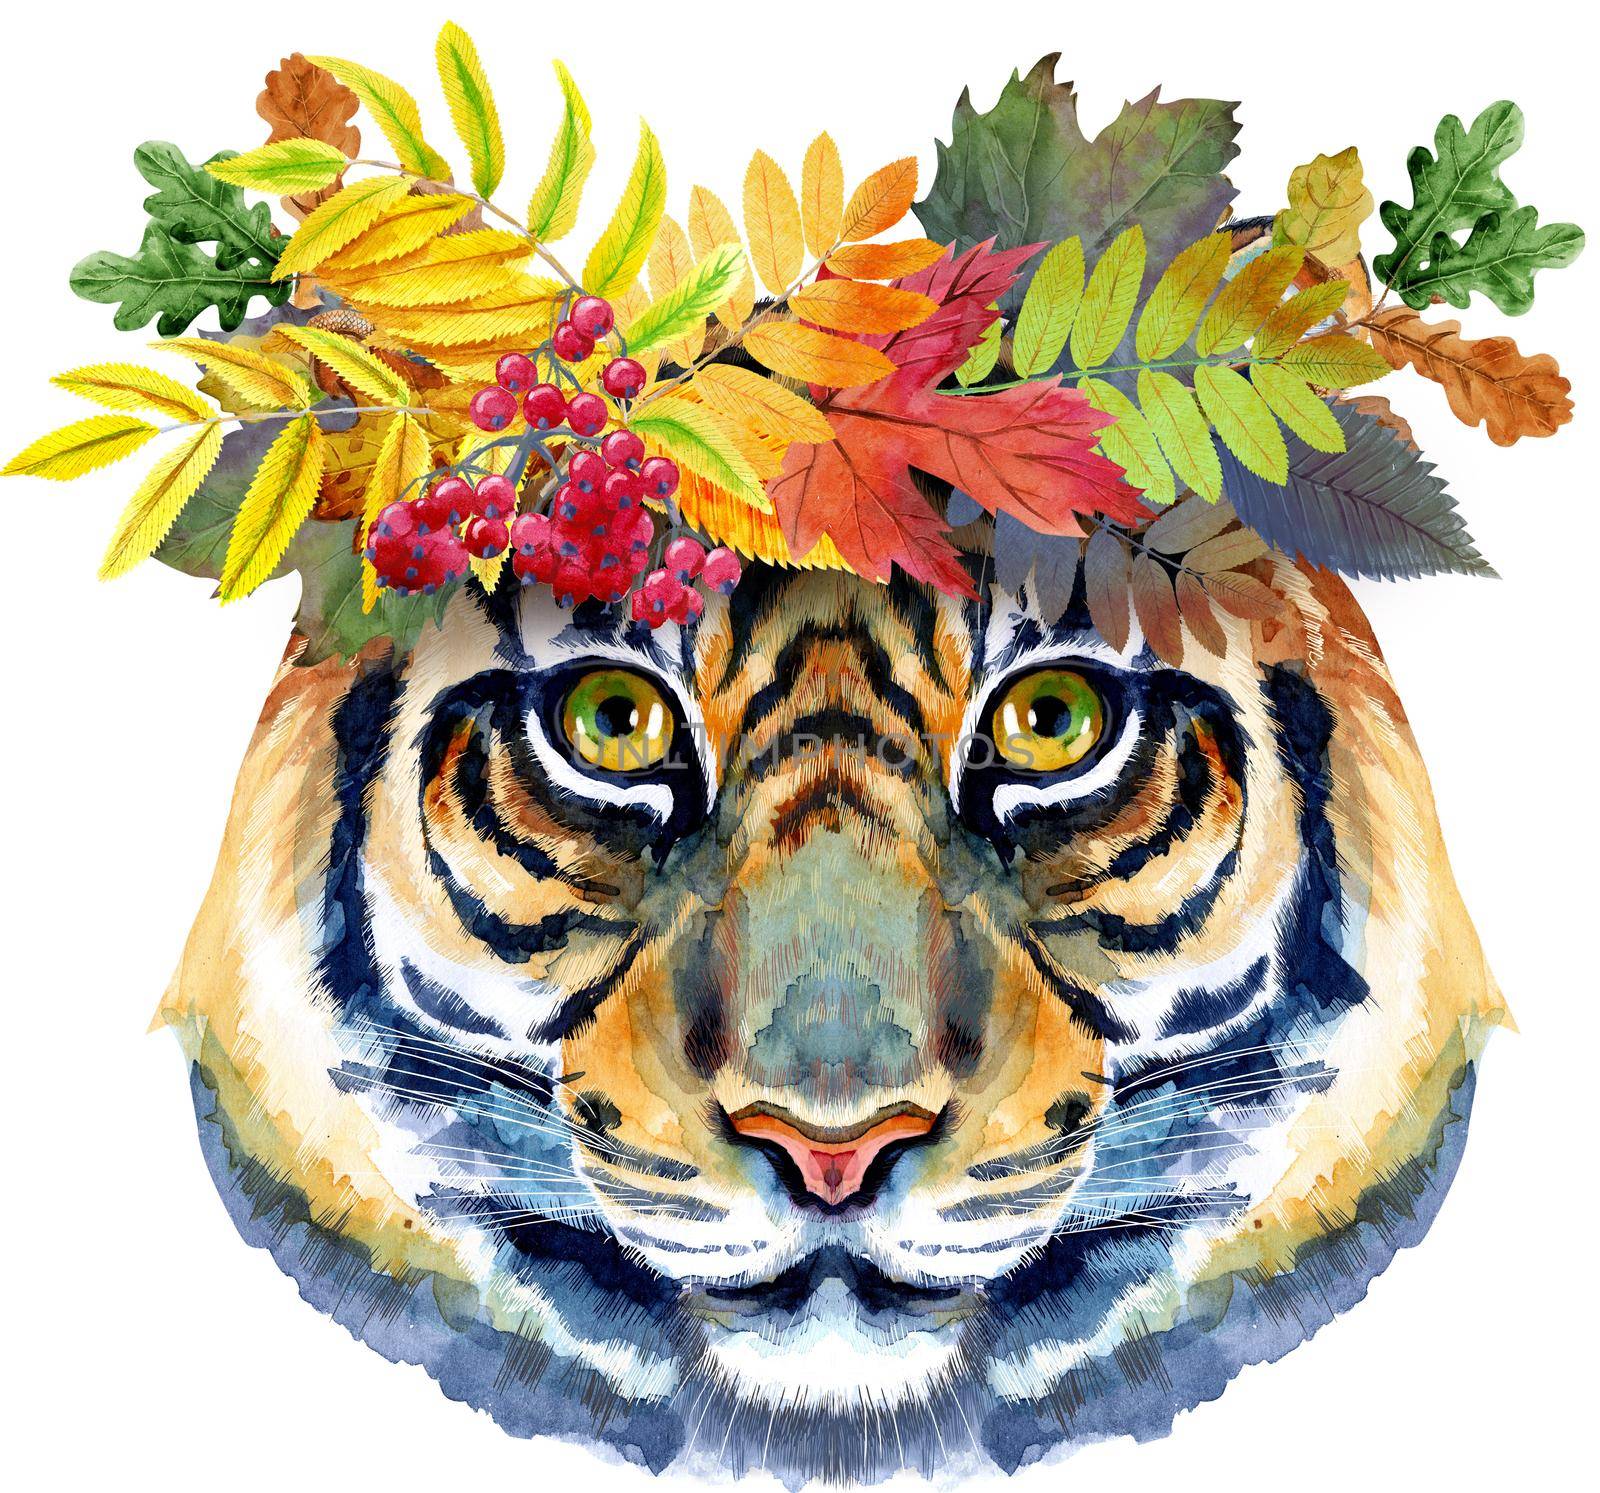 Tiger head in a wreath of autumn leaves. Horoscope character isolated on white background.